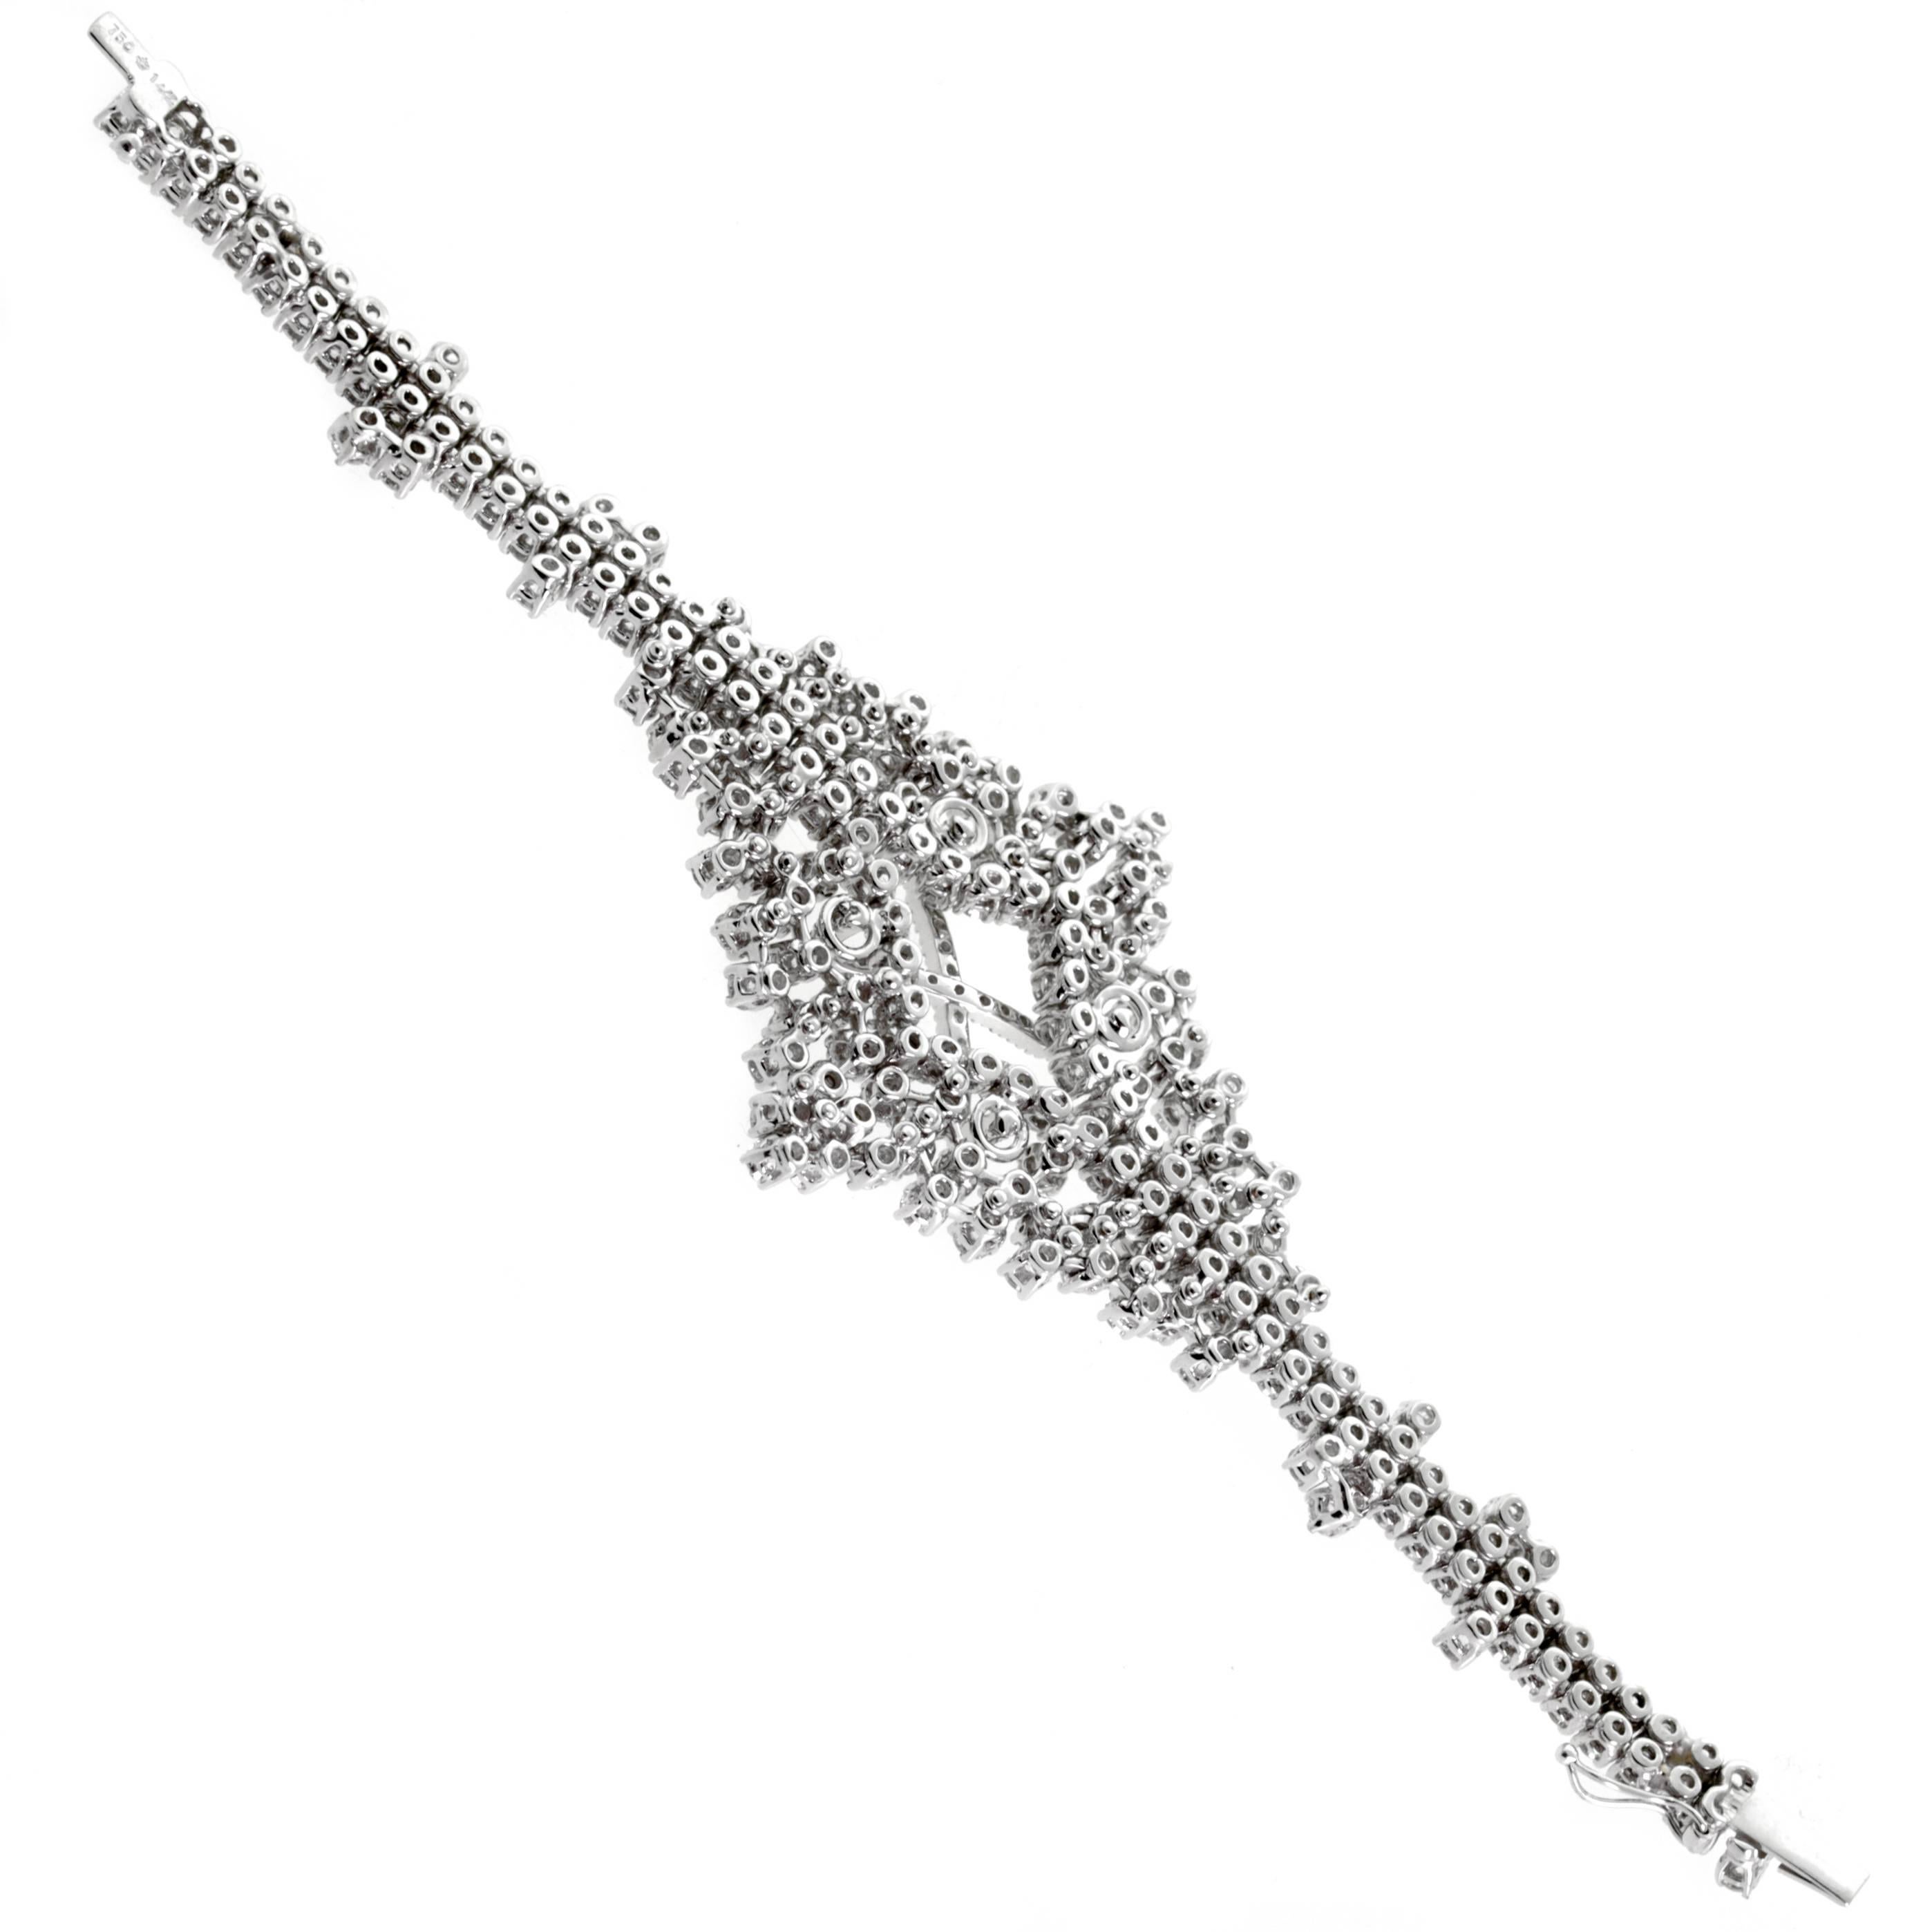 A fabulous hand made 18k white gold diamond bracelet set with appx 14.4cts of round brilliant shiny perfect cut diamonds (Vs-Si1) quality hand set in 18k white gold. The bracelet measures 1.65